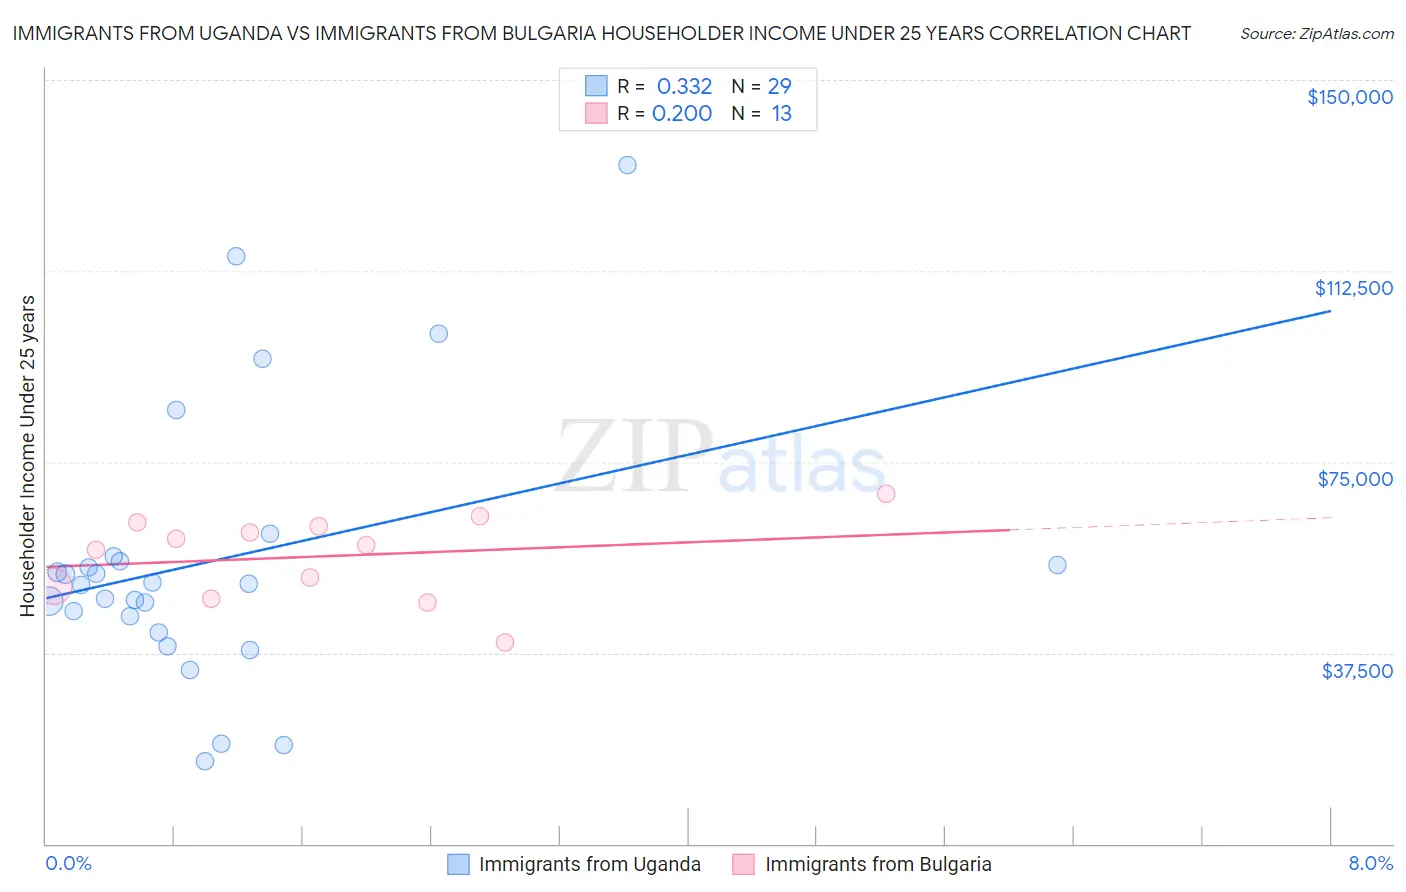 Immigrants from Uganda vs Immigrants from Bulgaria Householder Income Under 25 years